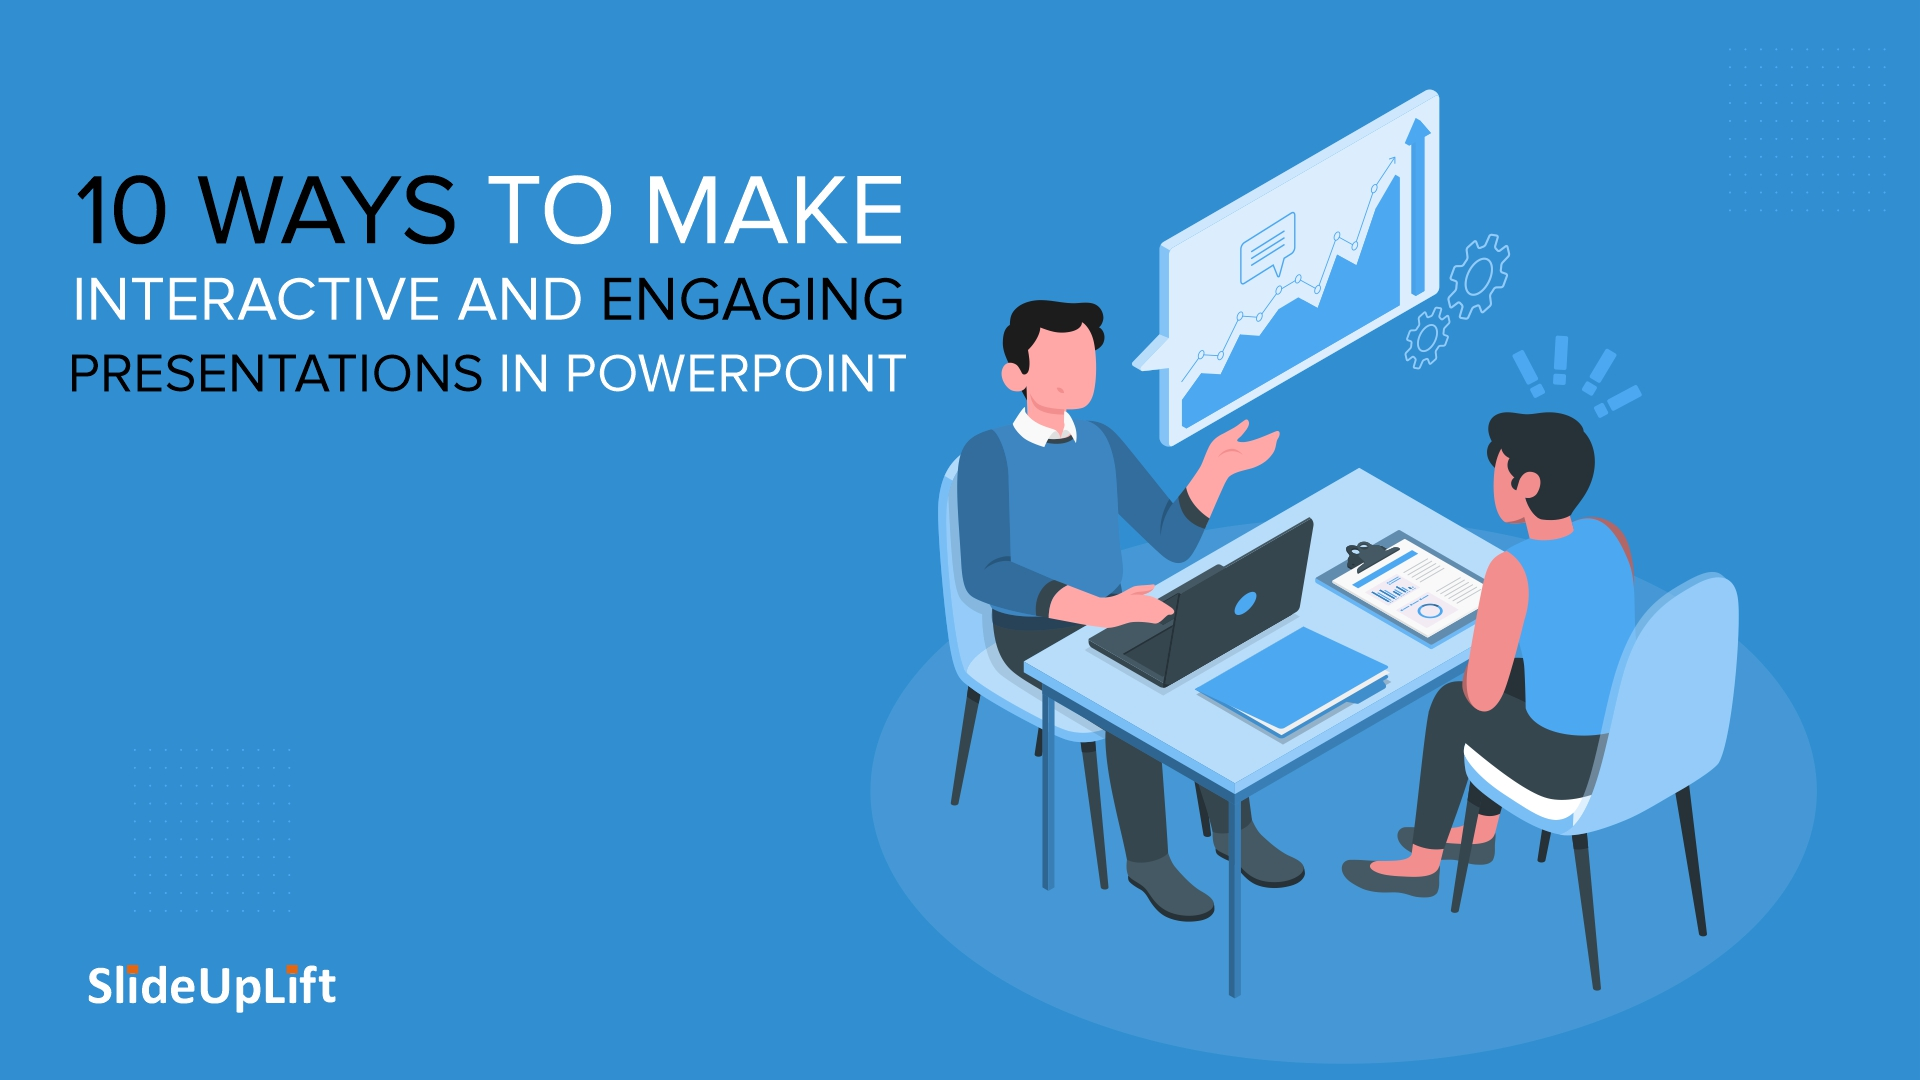 10 Ways To Make Interactive And Engaging Presentations In PowerPoint